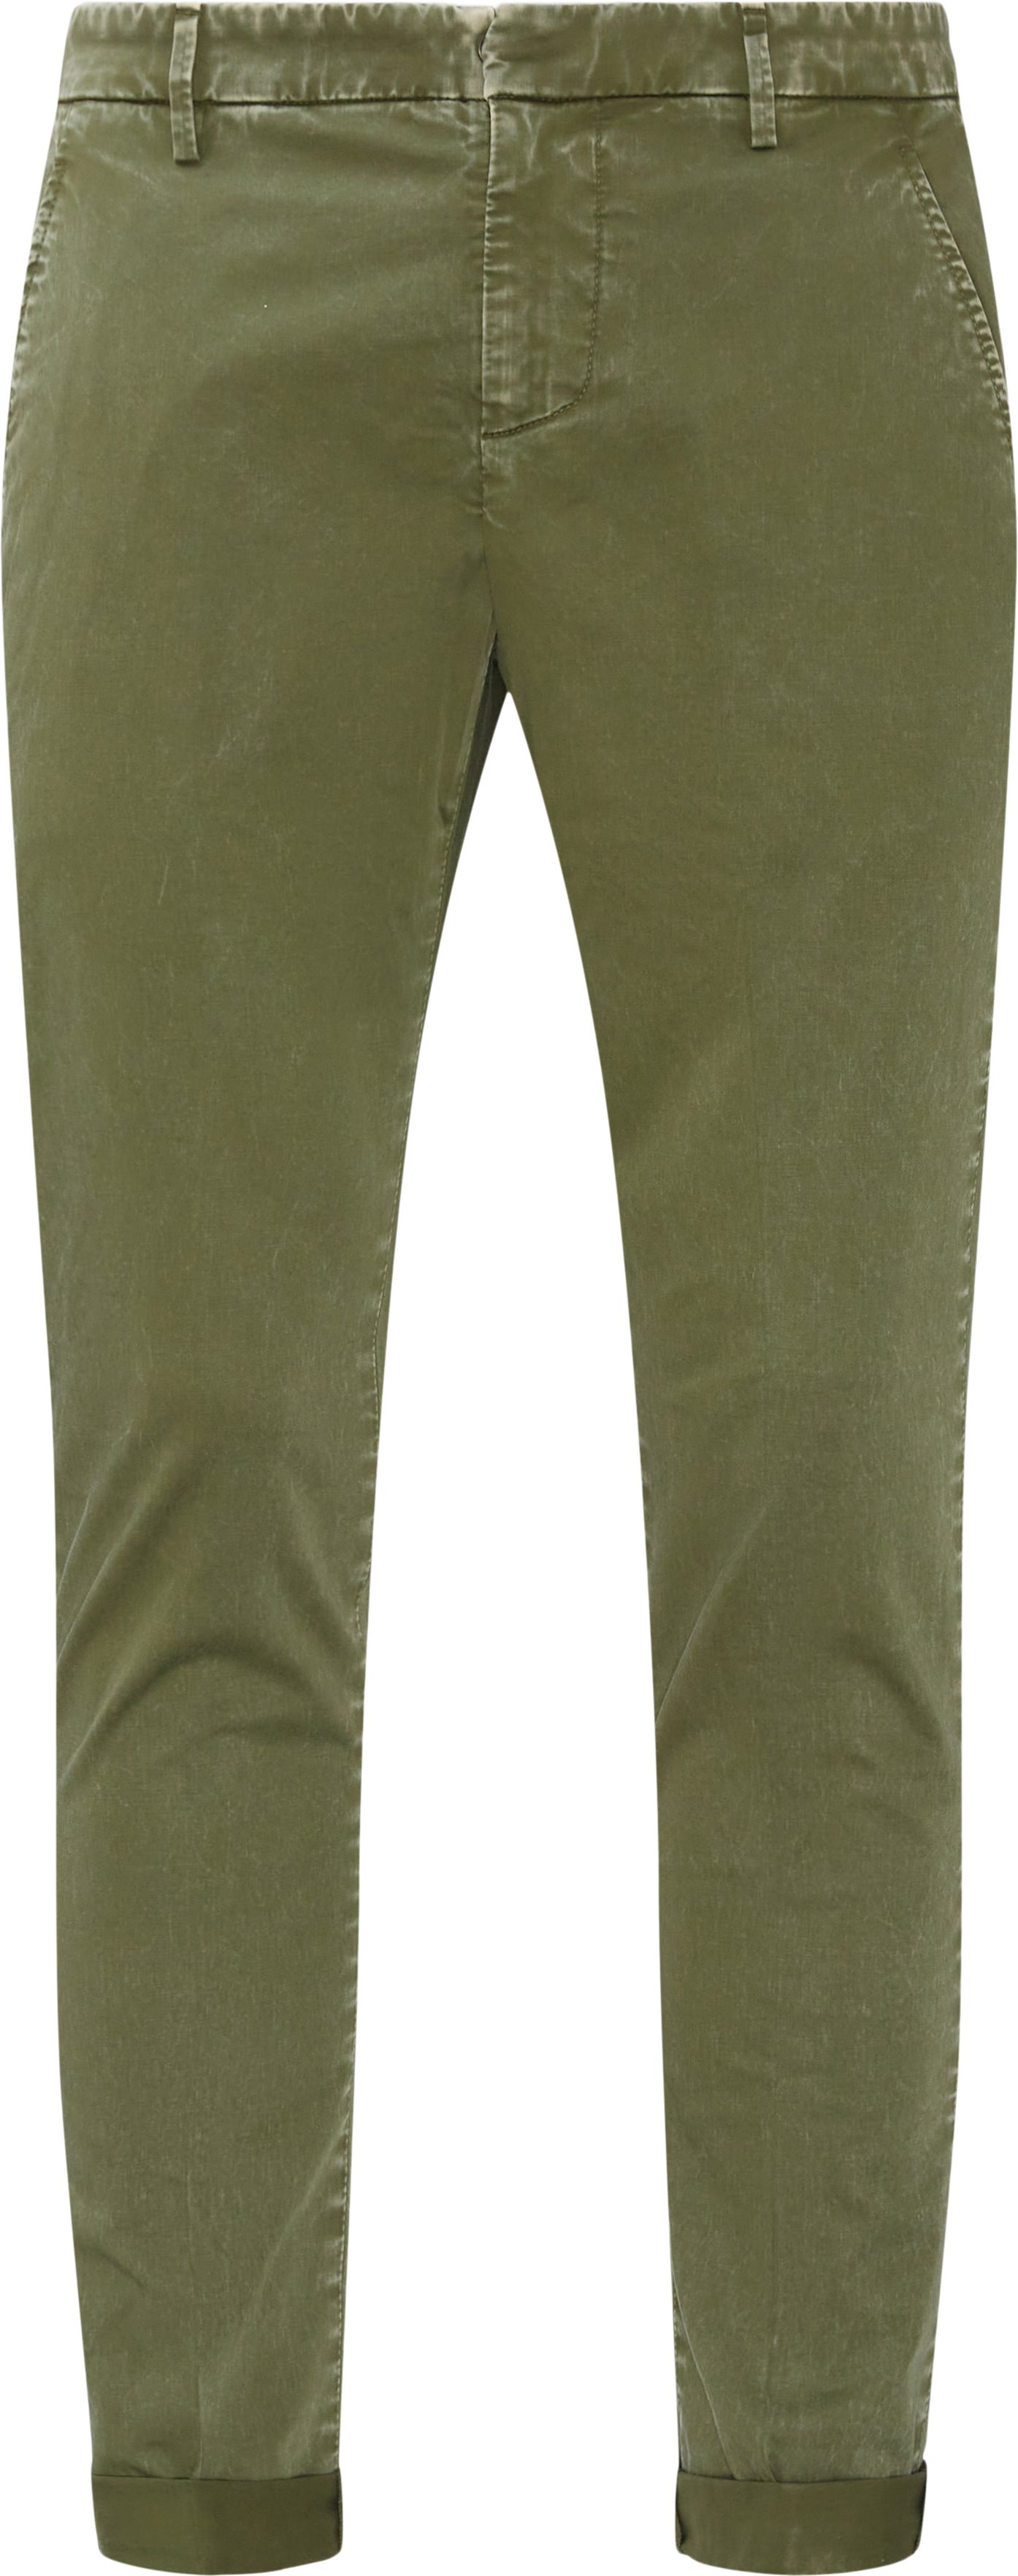 Trousers - Slim fit - Army